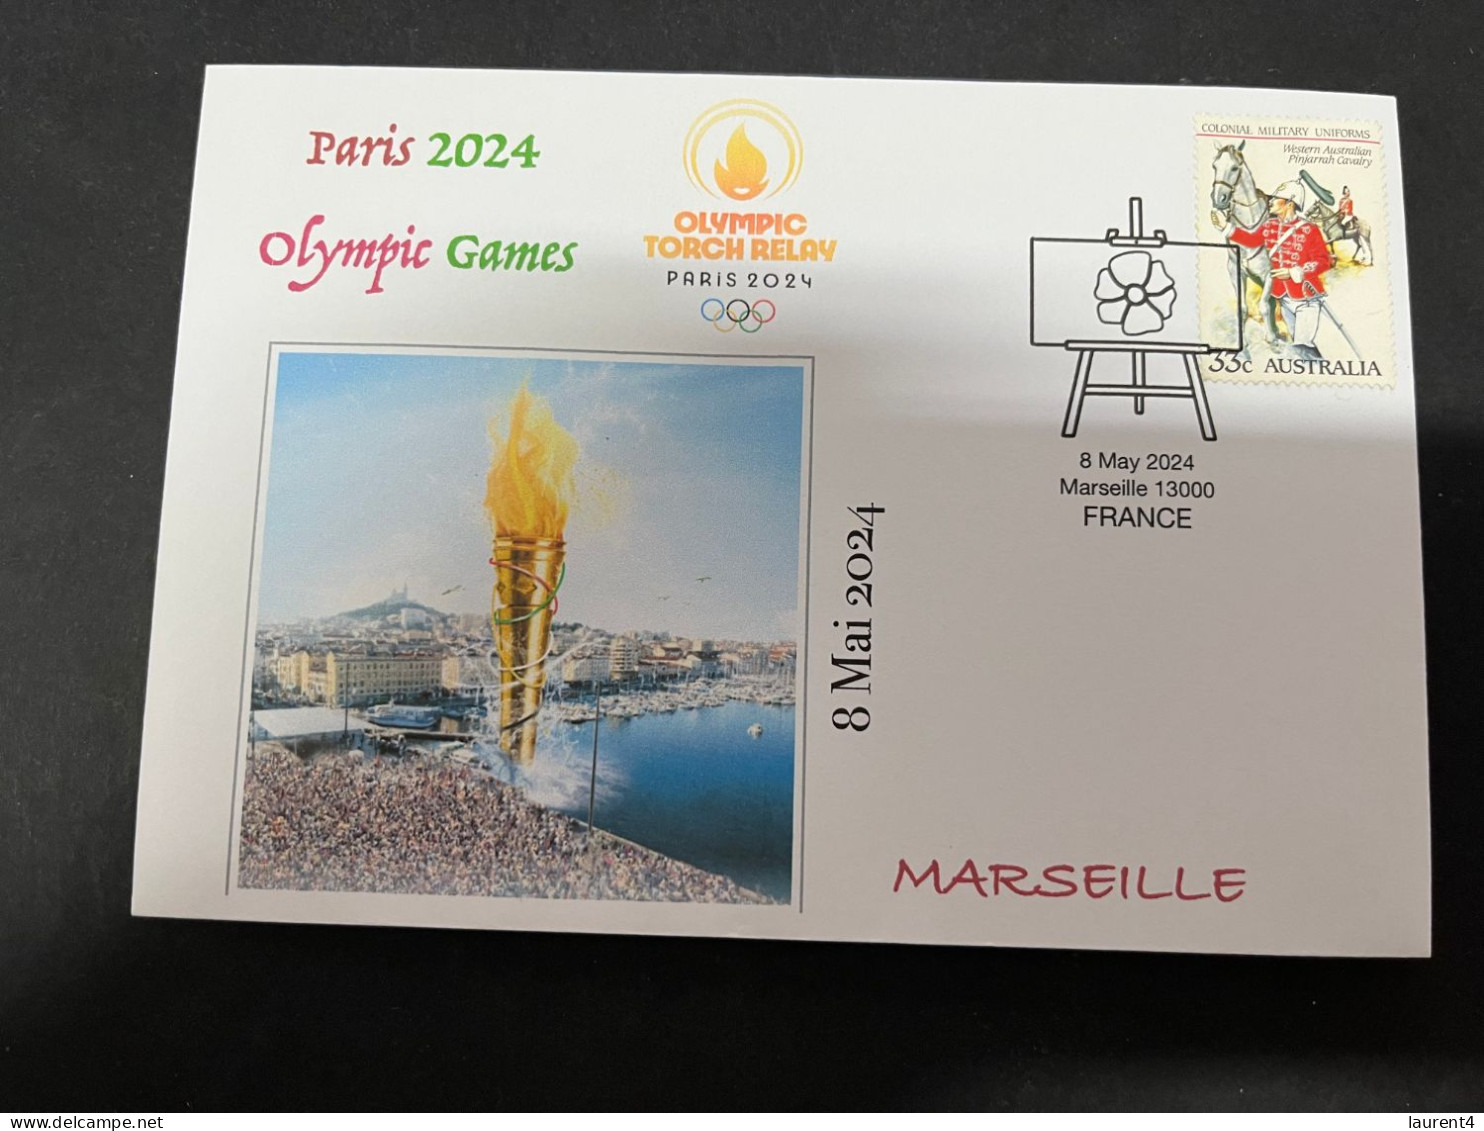 9-5-2024 (4 Z 32) Paris Olympic Games 2024 - The Olympic Flame Travel On Sail Ship BELEM Arrive In Marseille (8-5-2024) - Verano 2024 : París